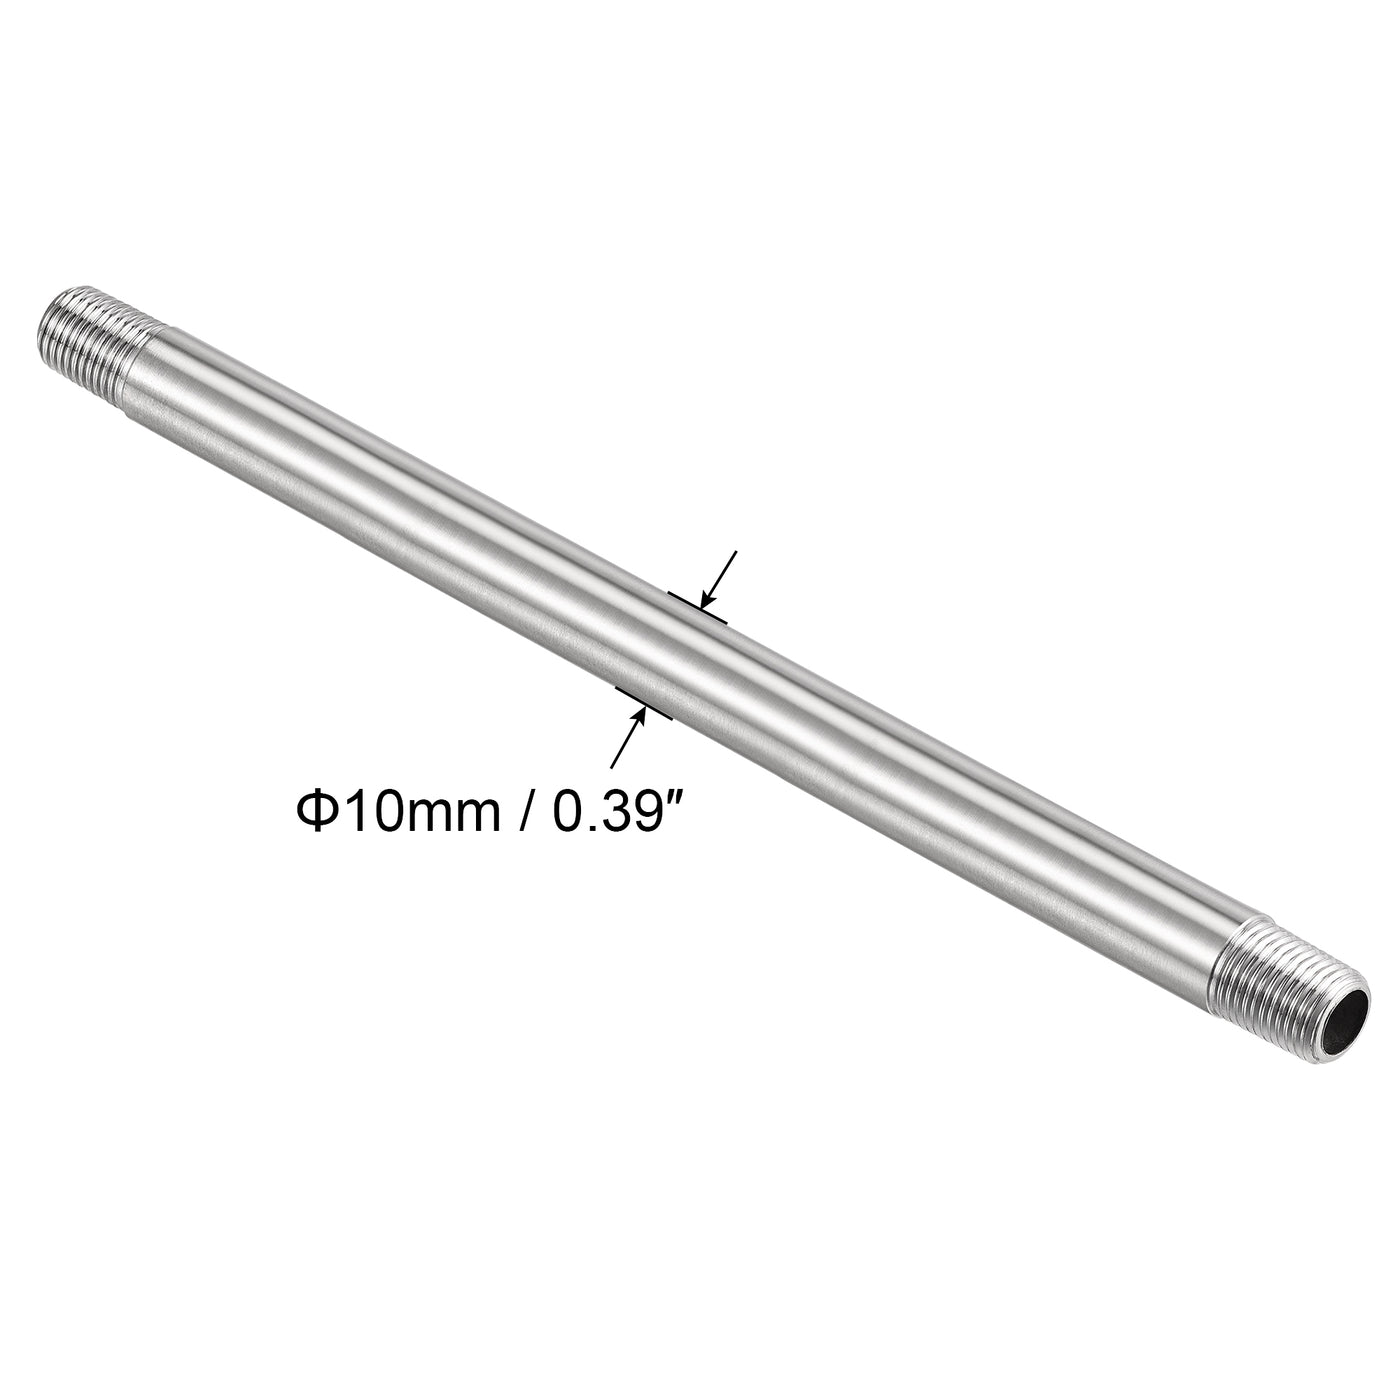 Uxcell Uxcell 304 Stainless Steel Pipe Fitting G1/8 Male Thread 200mm Length Coupler for Extending Pipes